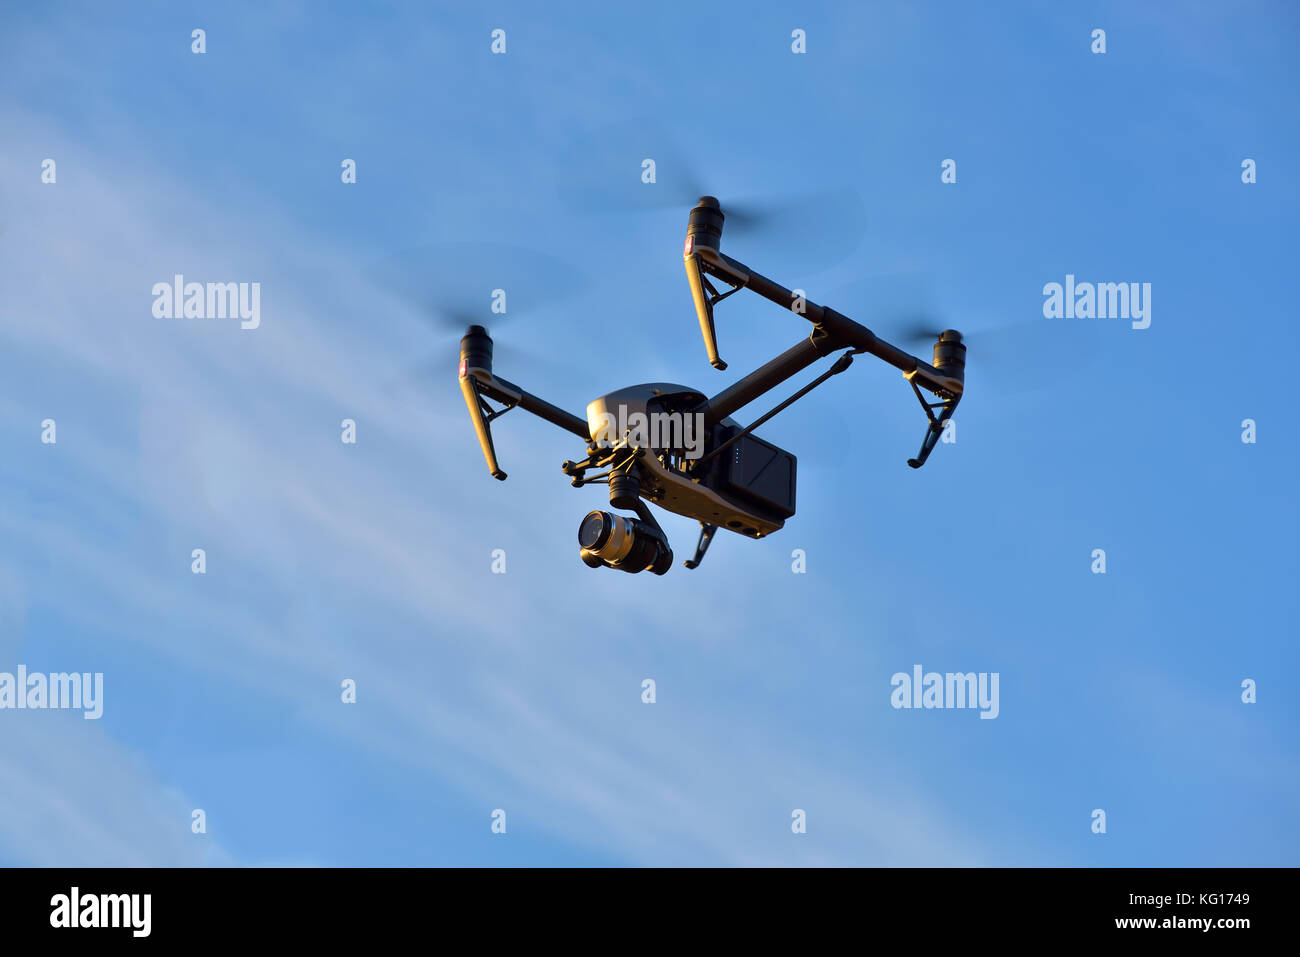 Flying big drone on blue sky background Stock Photo